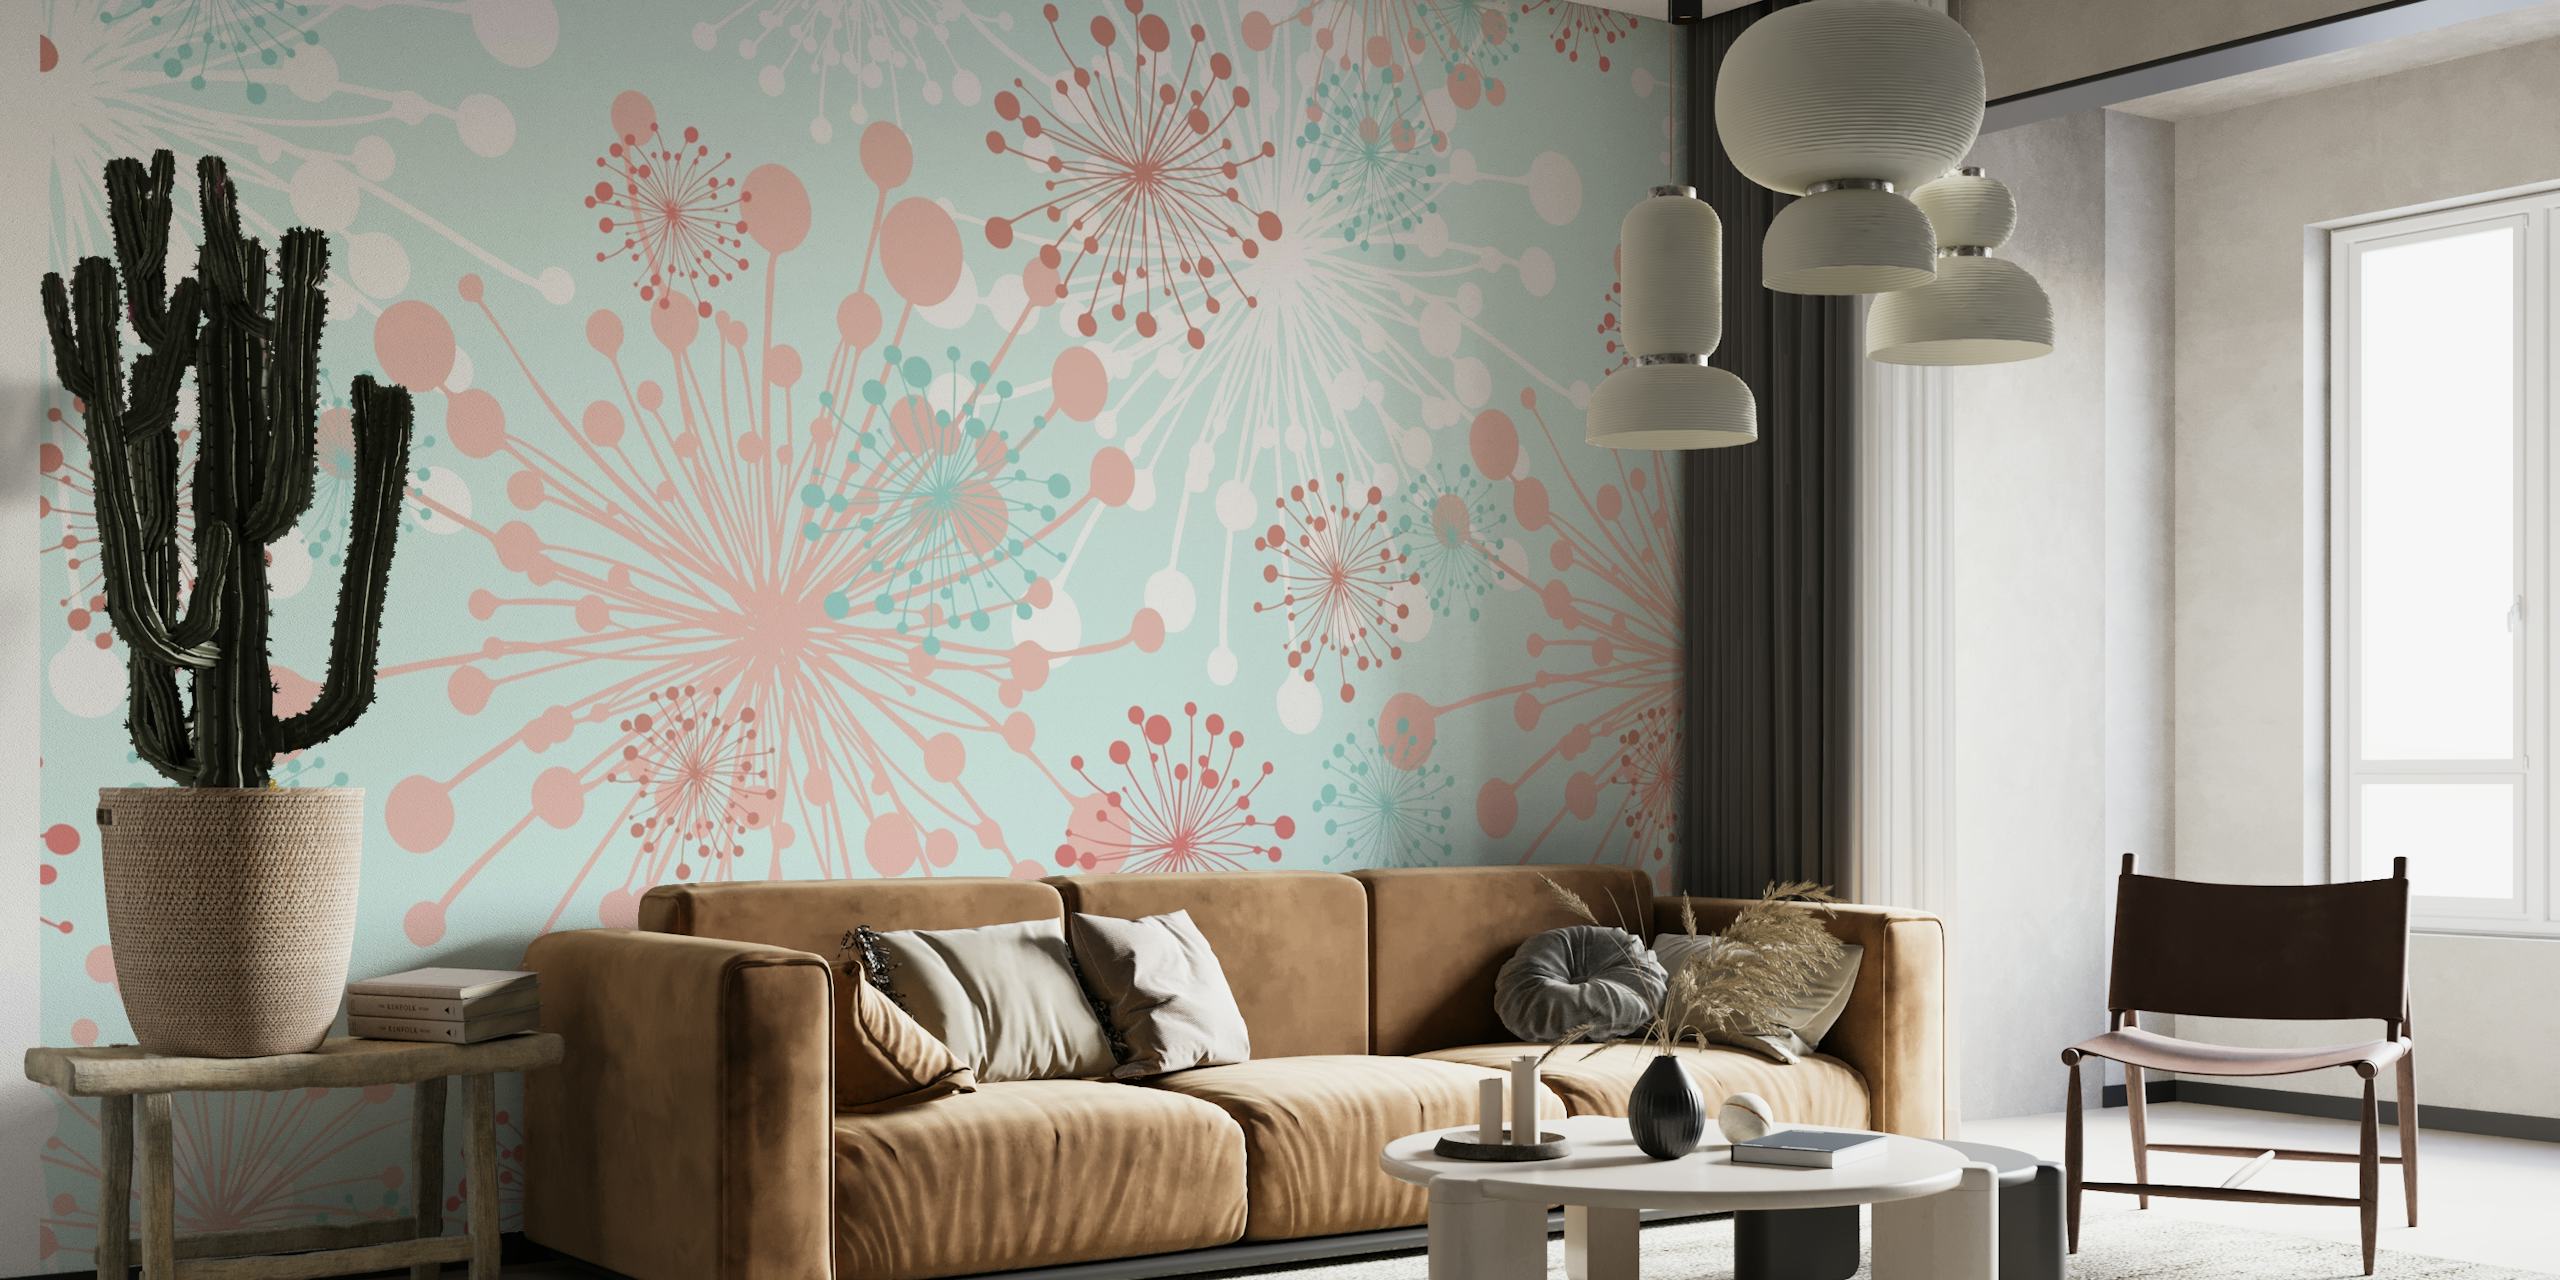 Dandelions Mint Blue Blush Wall Mural with whimsical dandelion silhouettes in soft pink and blue shades.